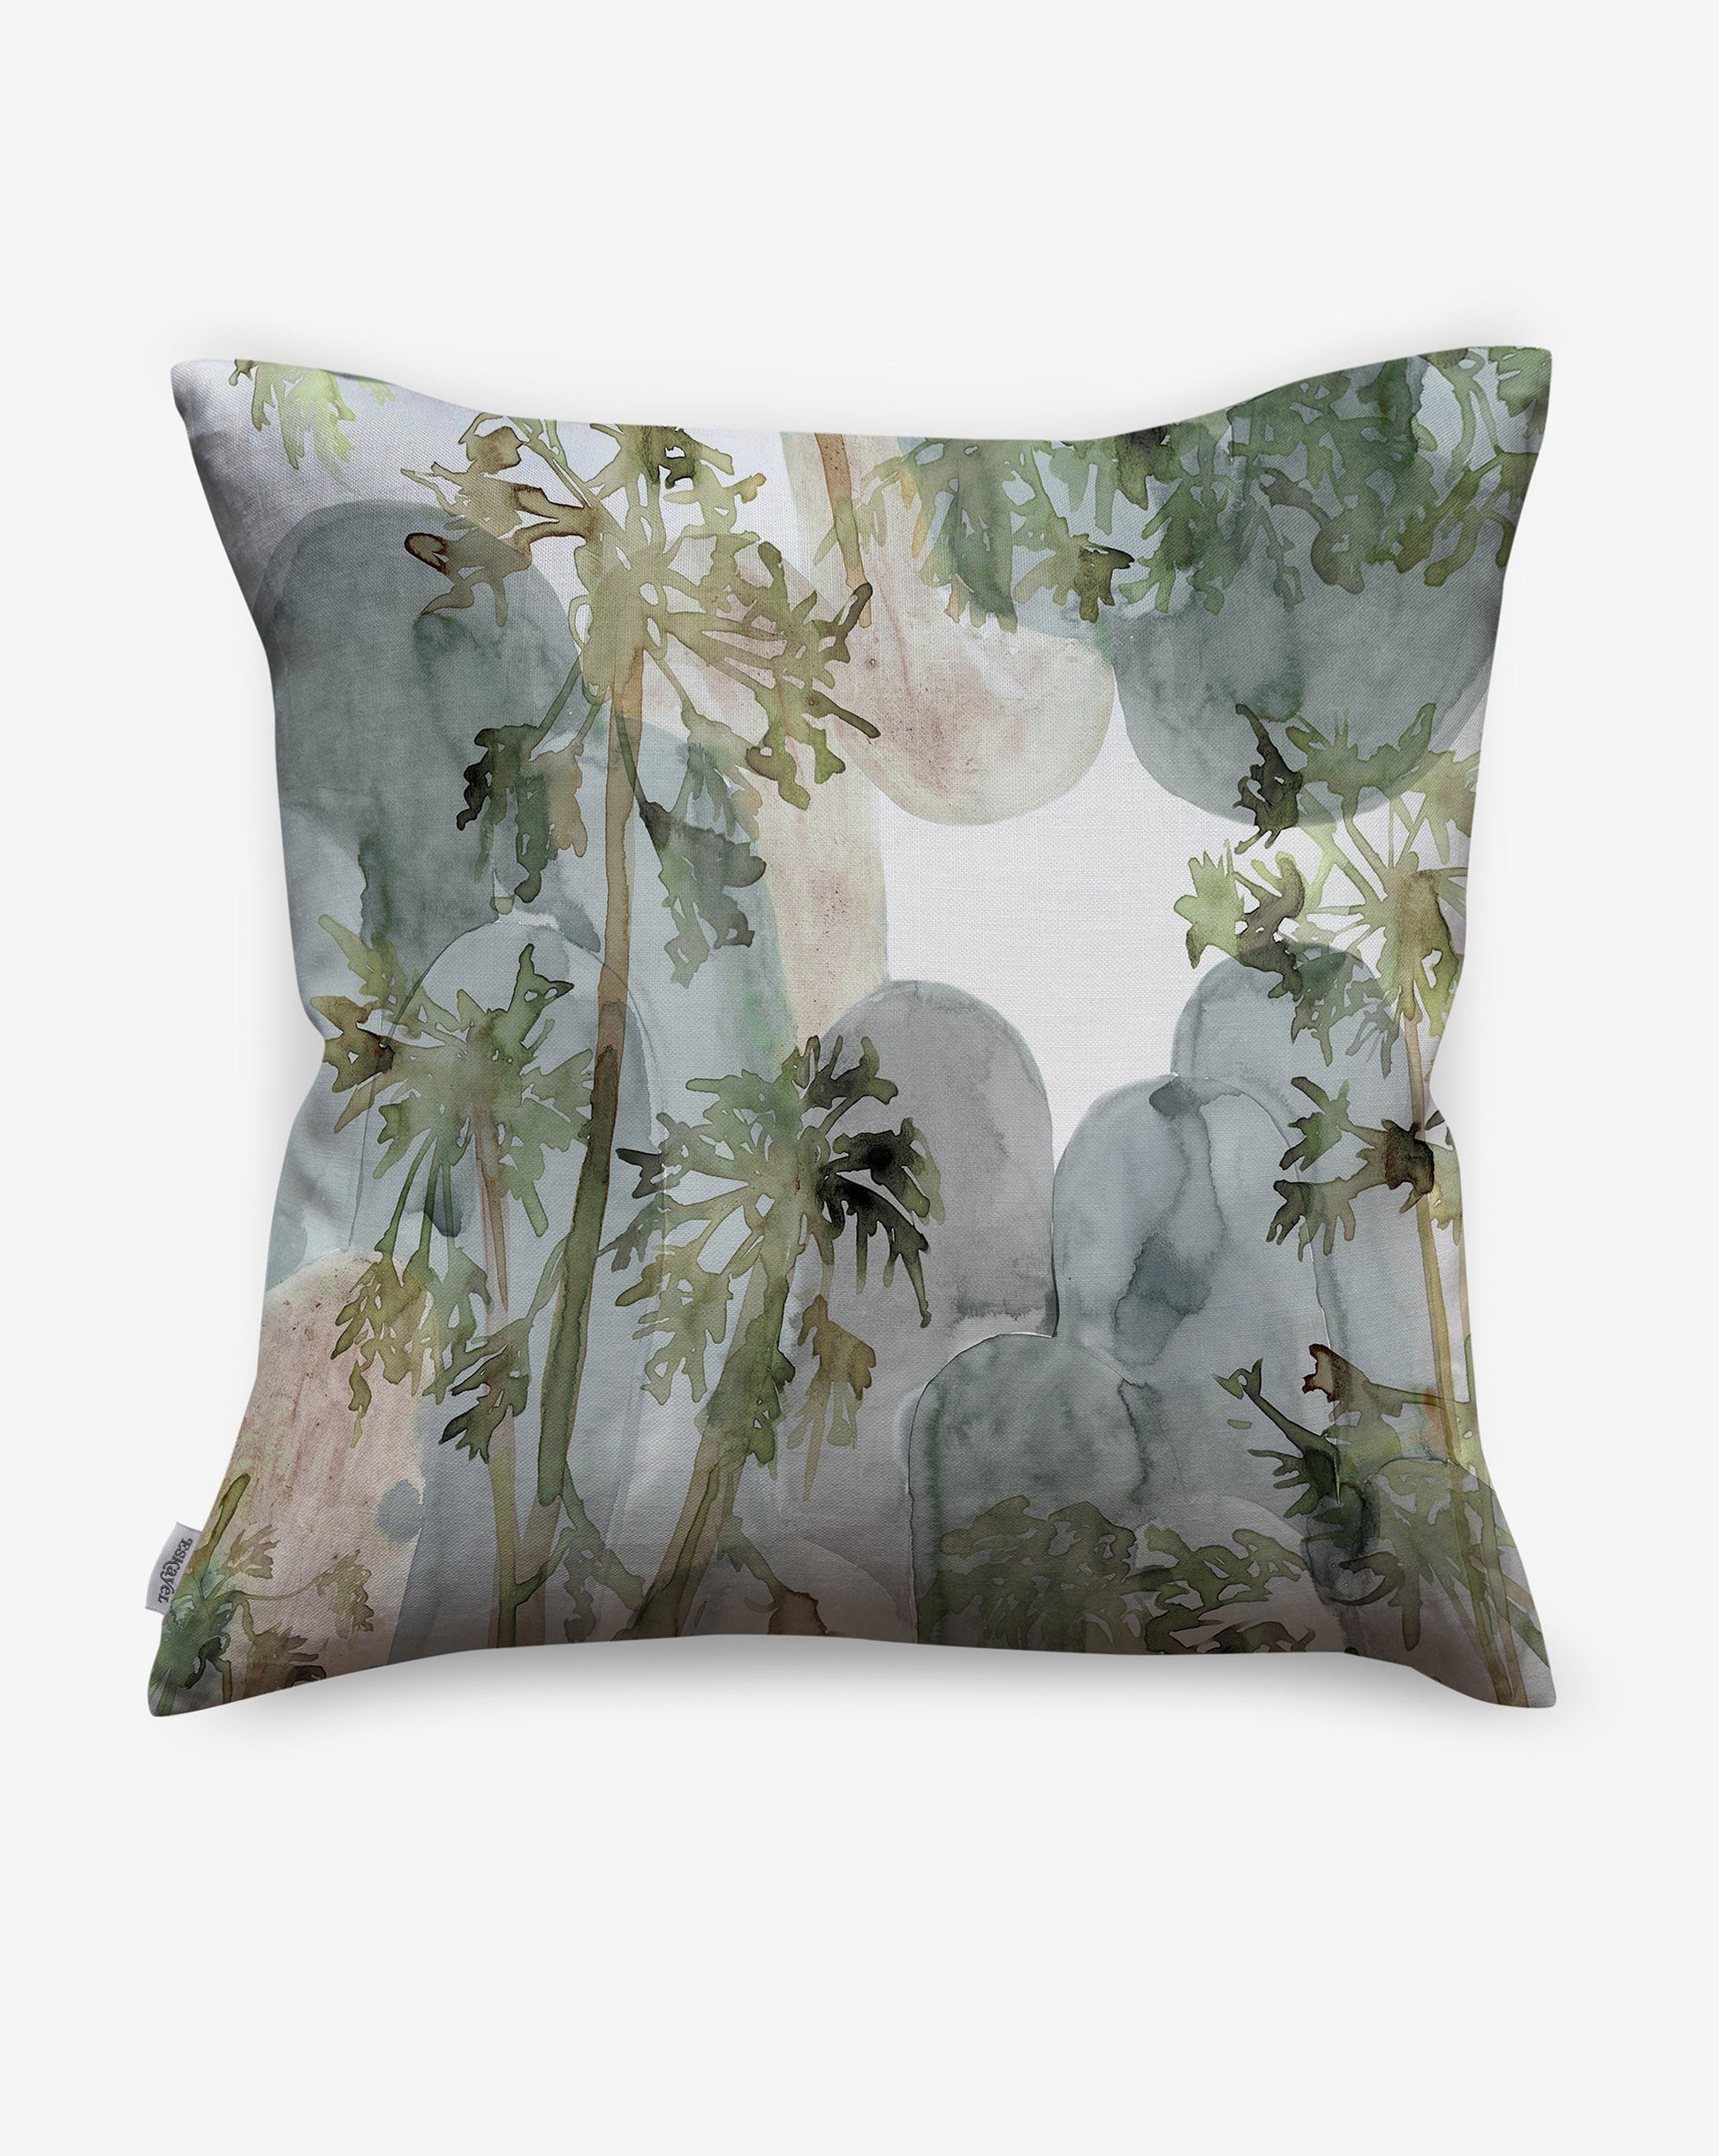 Depicting silhouettes of a tropical tree, luxurious Papaya Arc pillows in our Sage colorway feature greens and greys